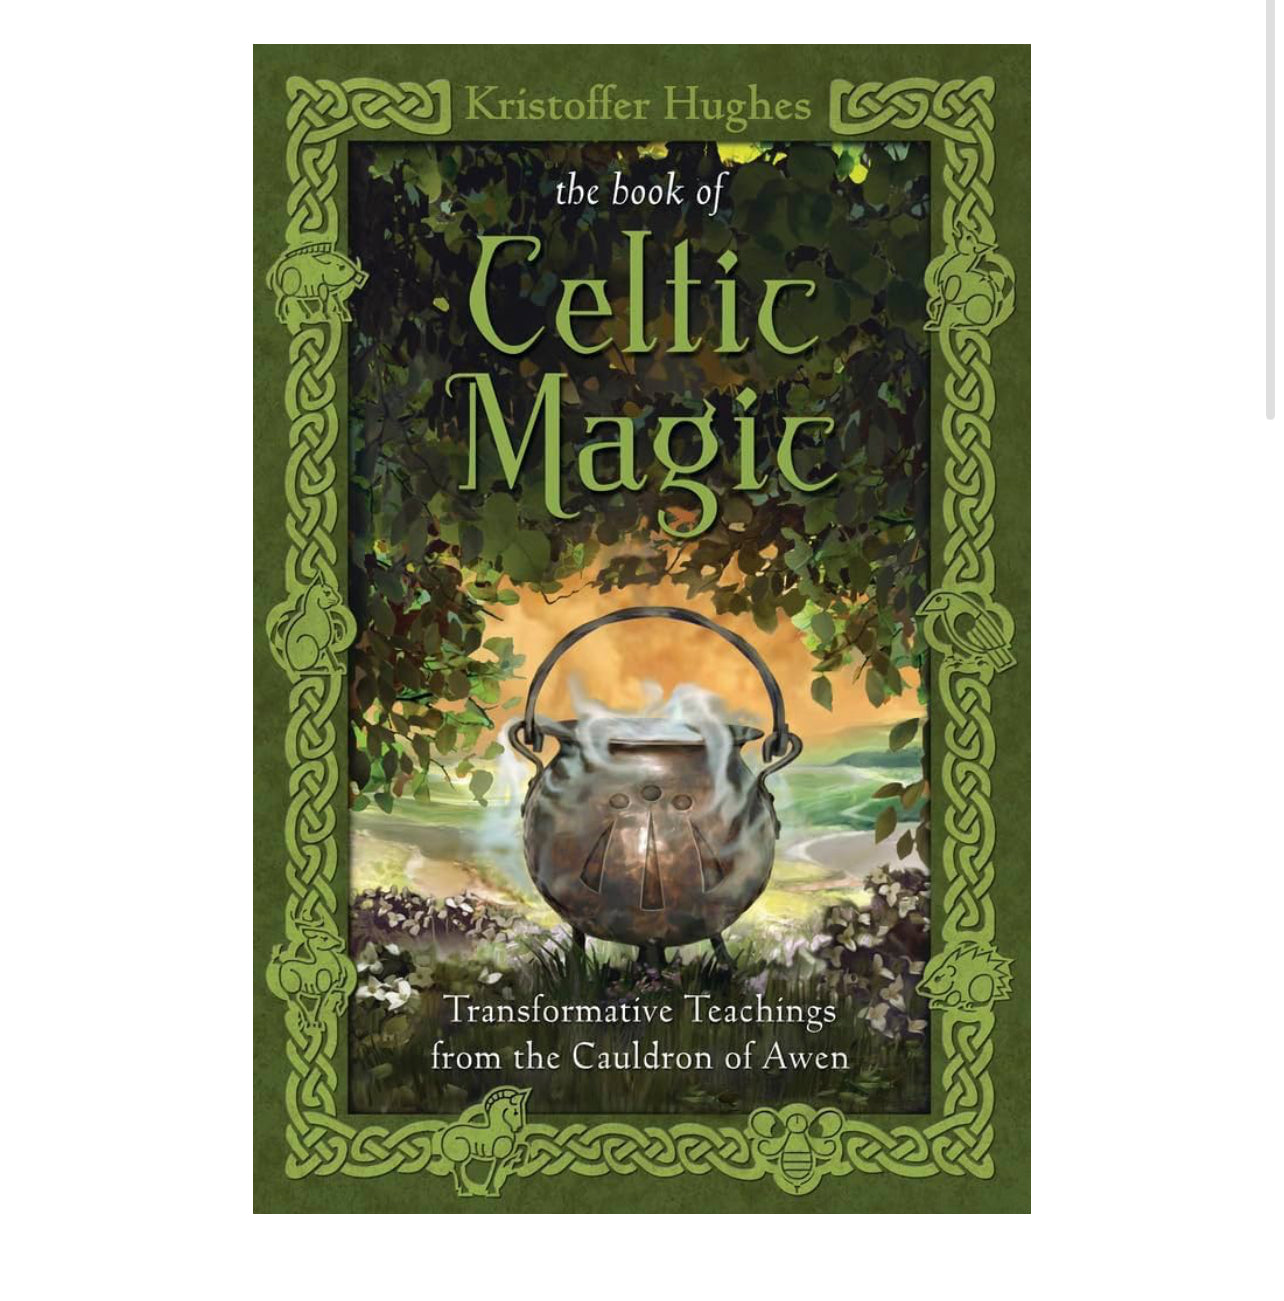 The Book of Celtic Magic: Transformative Teachings from the Cauldron of Awen